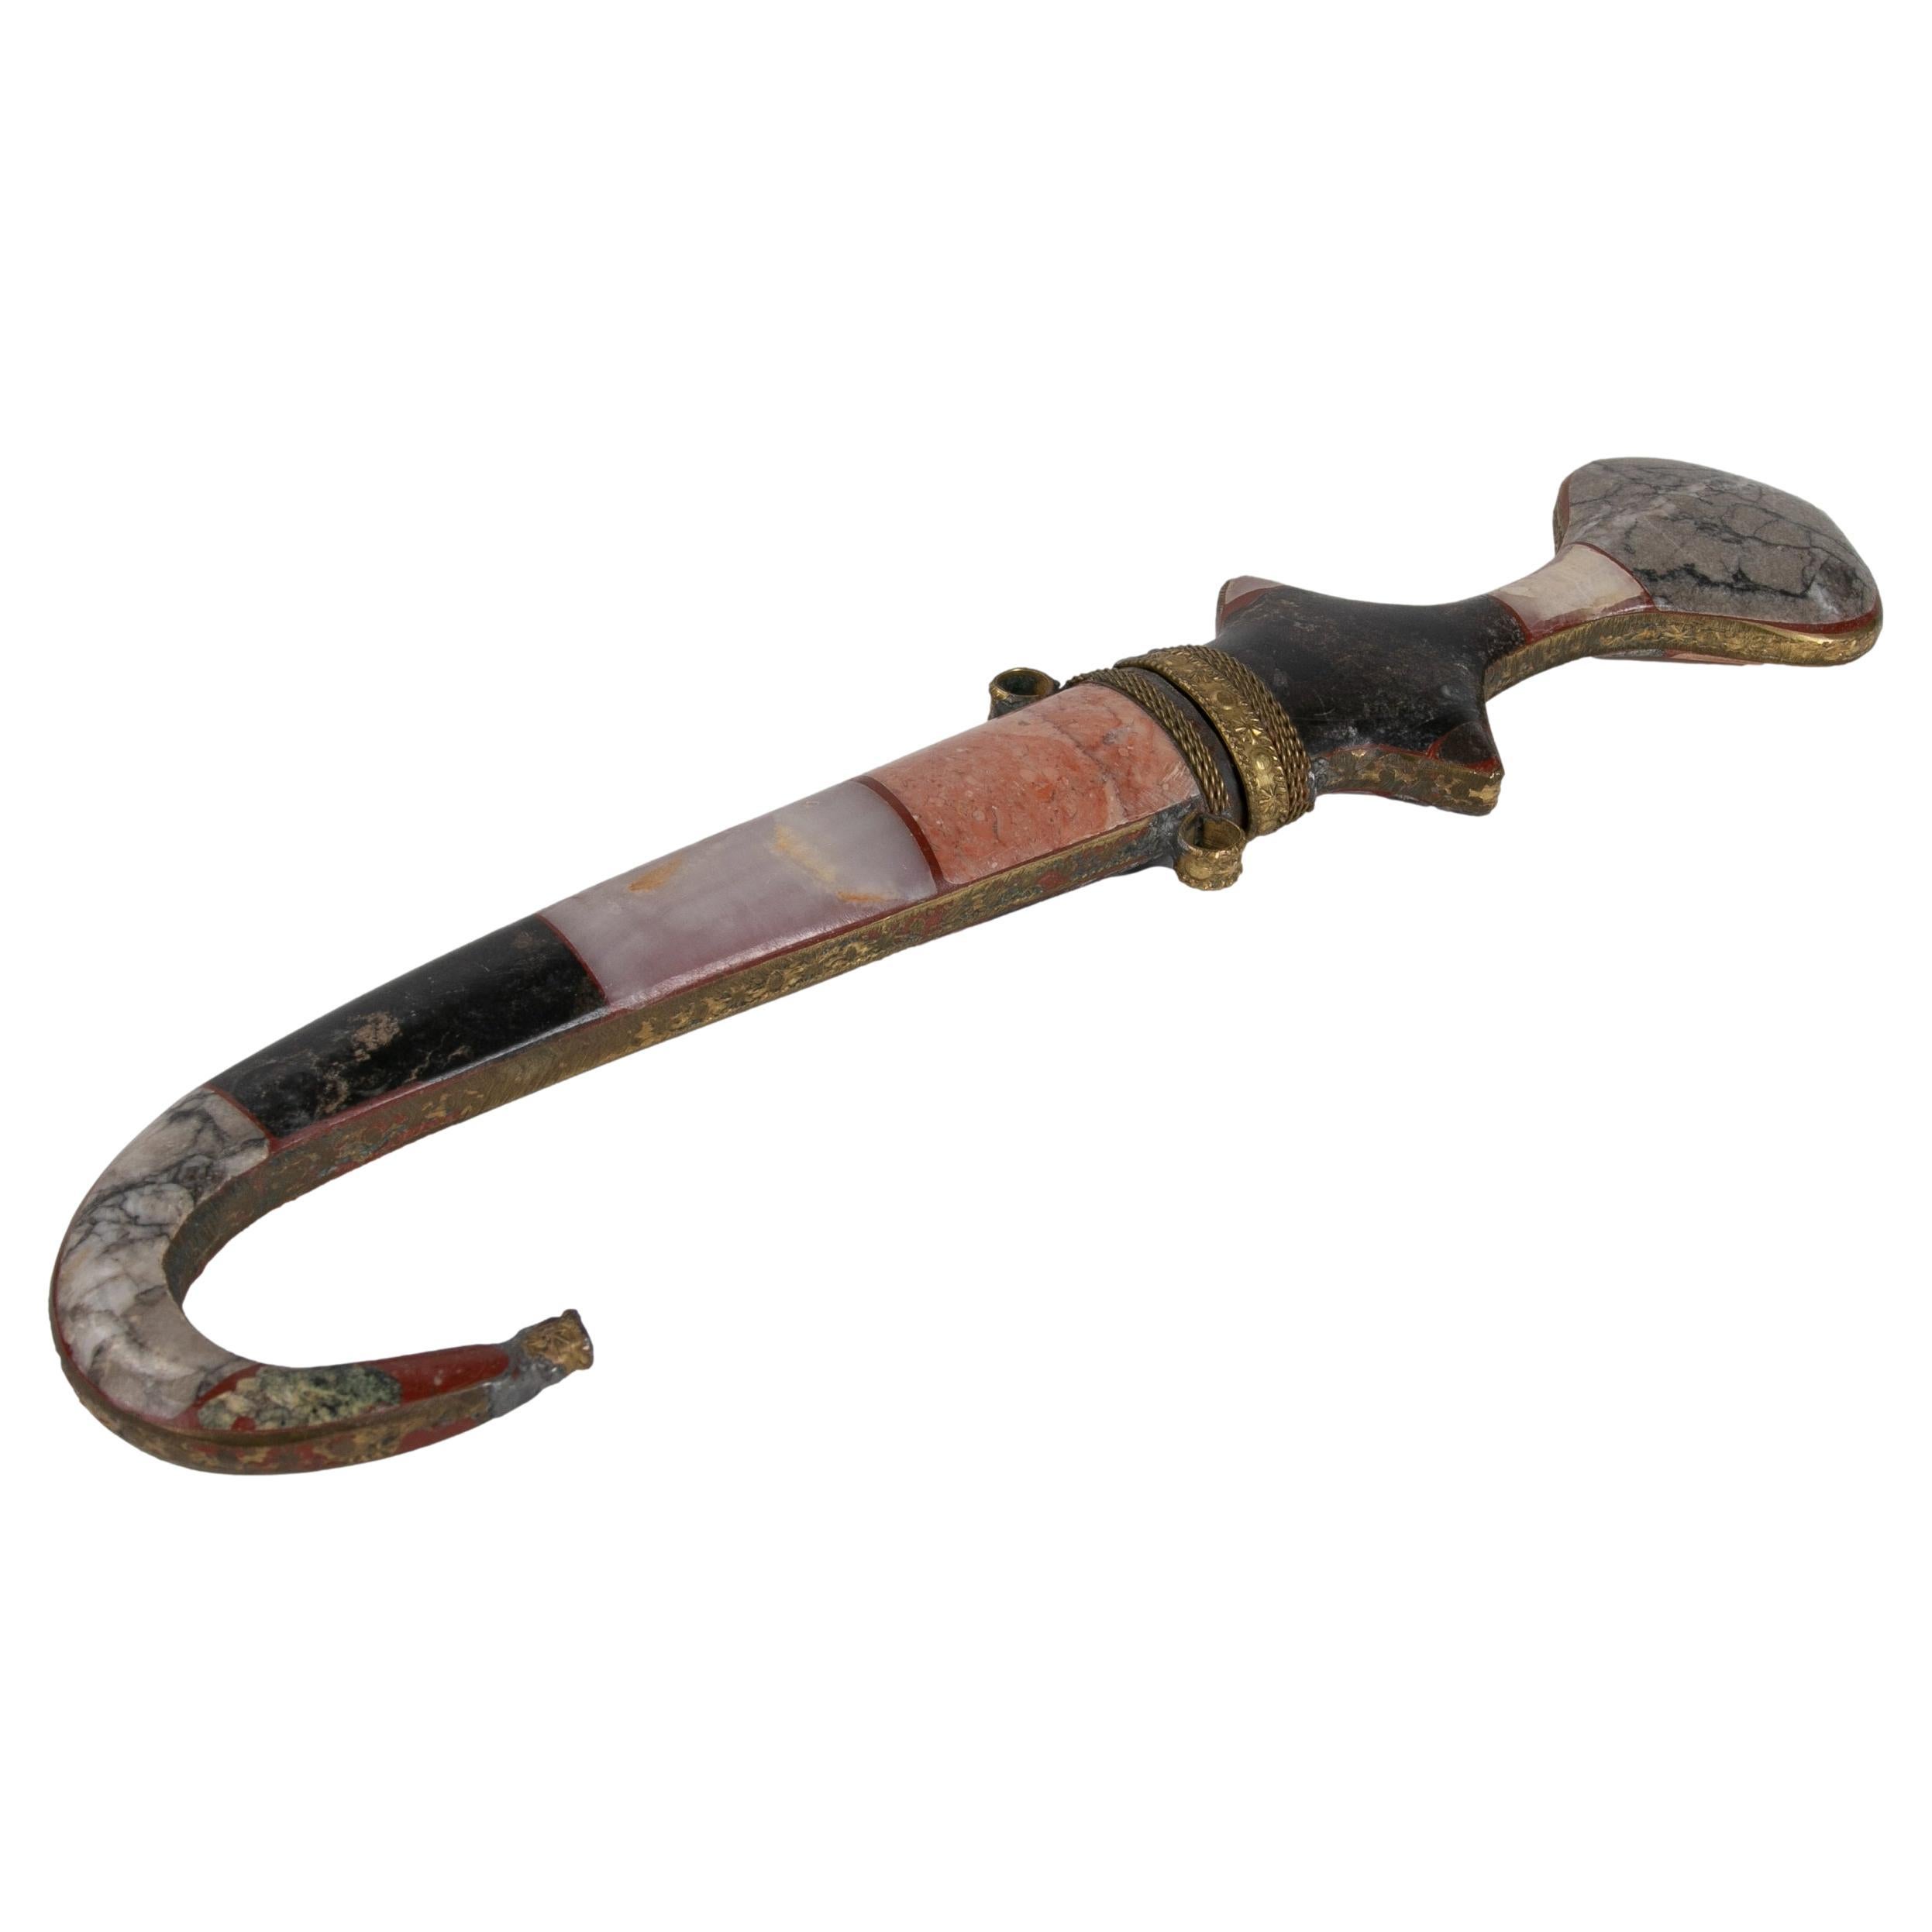 1980s Arabic Style Dagger Made with Hard Stones